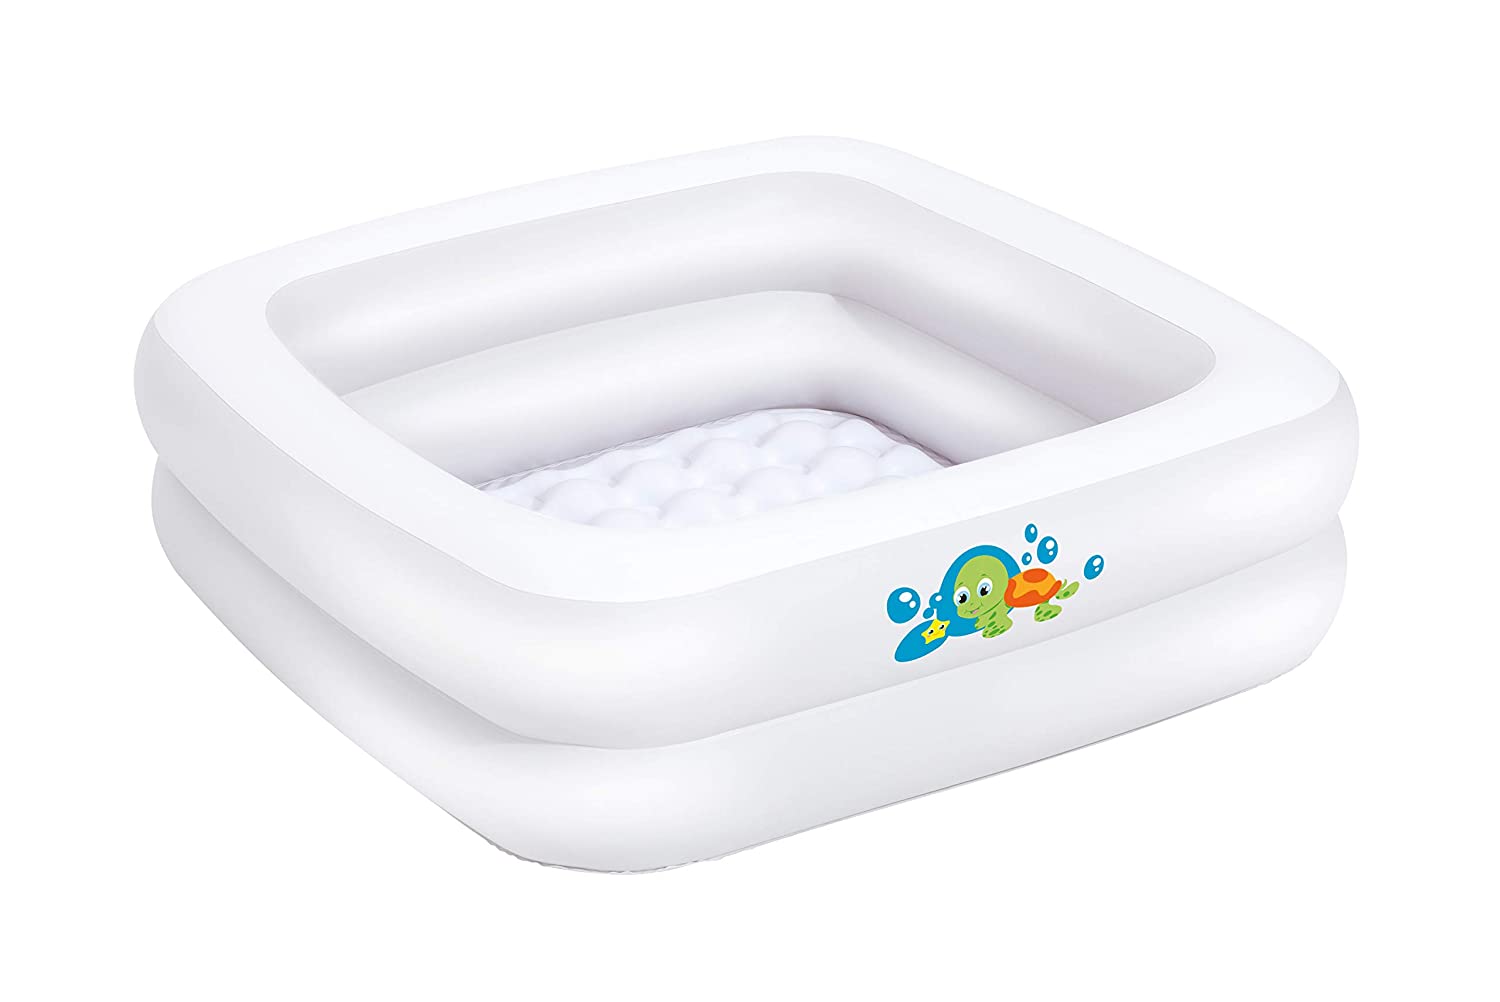 Bieco Baby Paddling Pool Approx. 86 x 86 x 25 cm Inflatable Bath for Indoor and Outdoor Use Swimming Pool Rectangular Small Paddling Pool for Children Inflatable Square Baby Bathtub